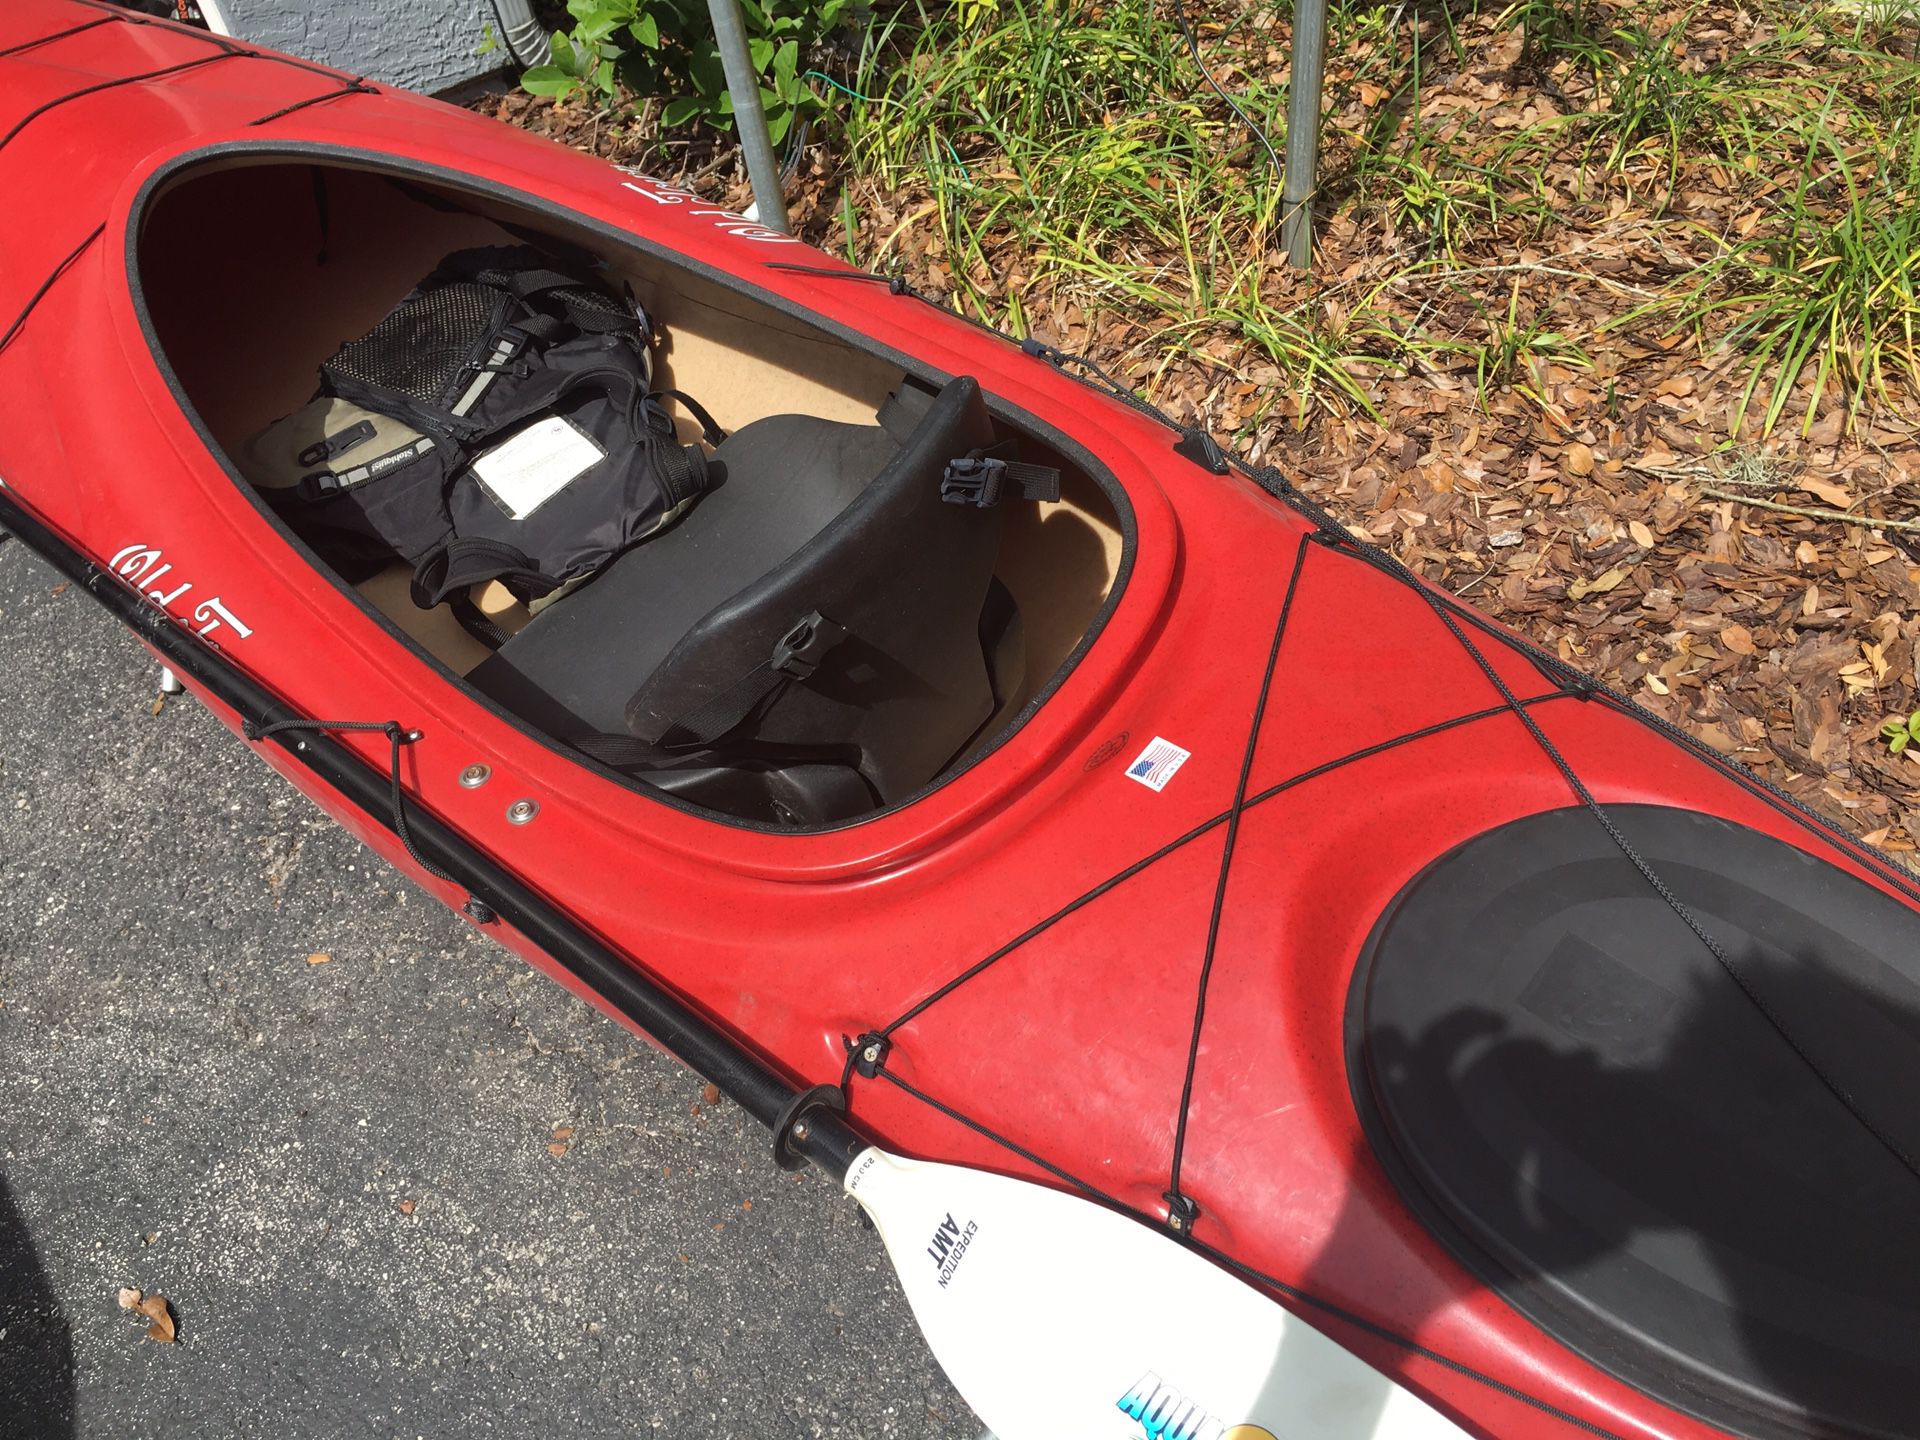 Old Town Adventure Xl 139 Touring Kayak For Sale In Tampa Fl Offerup